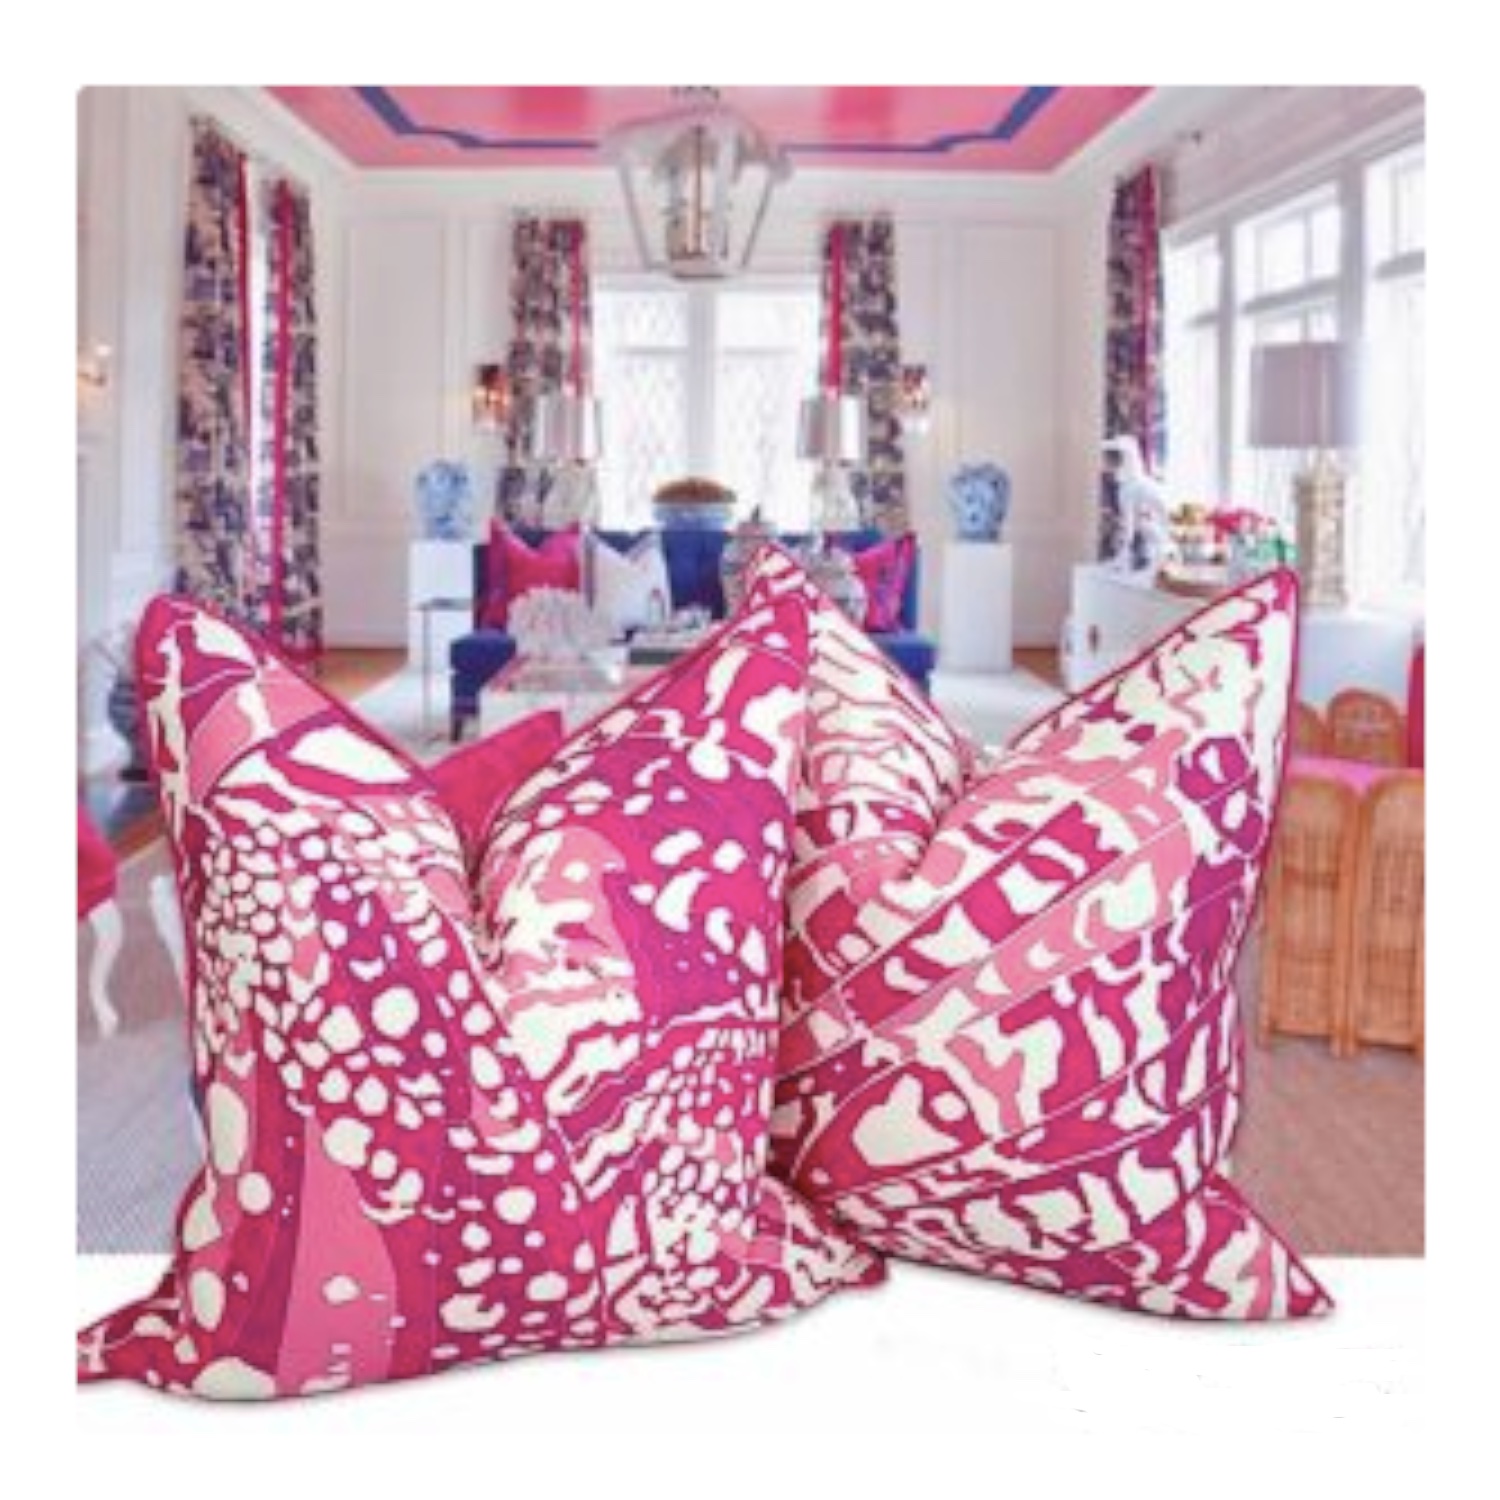 Pink and white patterned throw pillows.